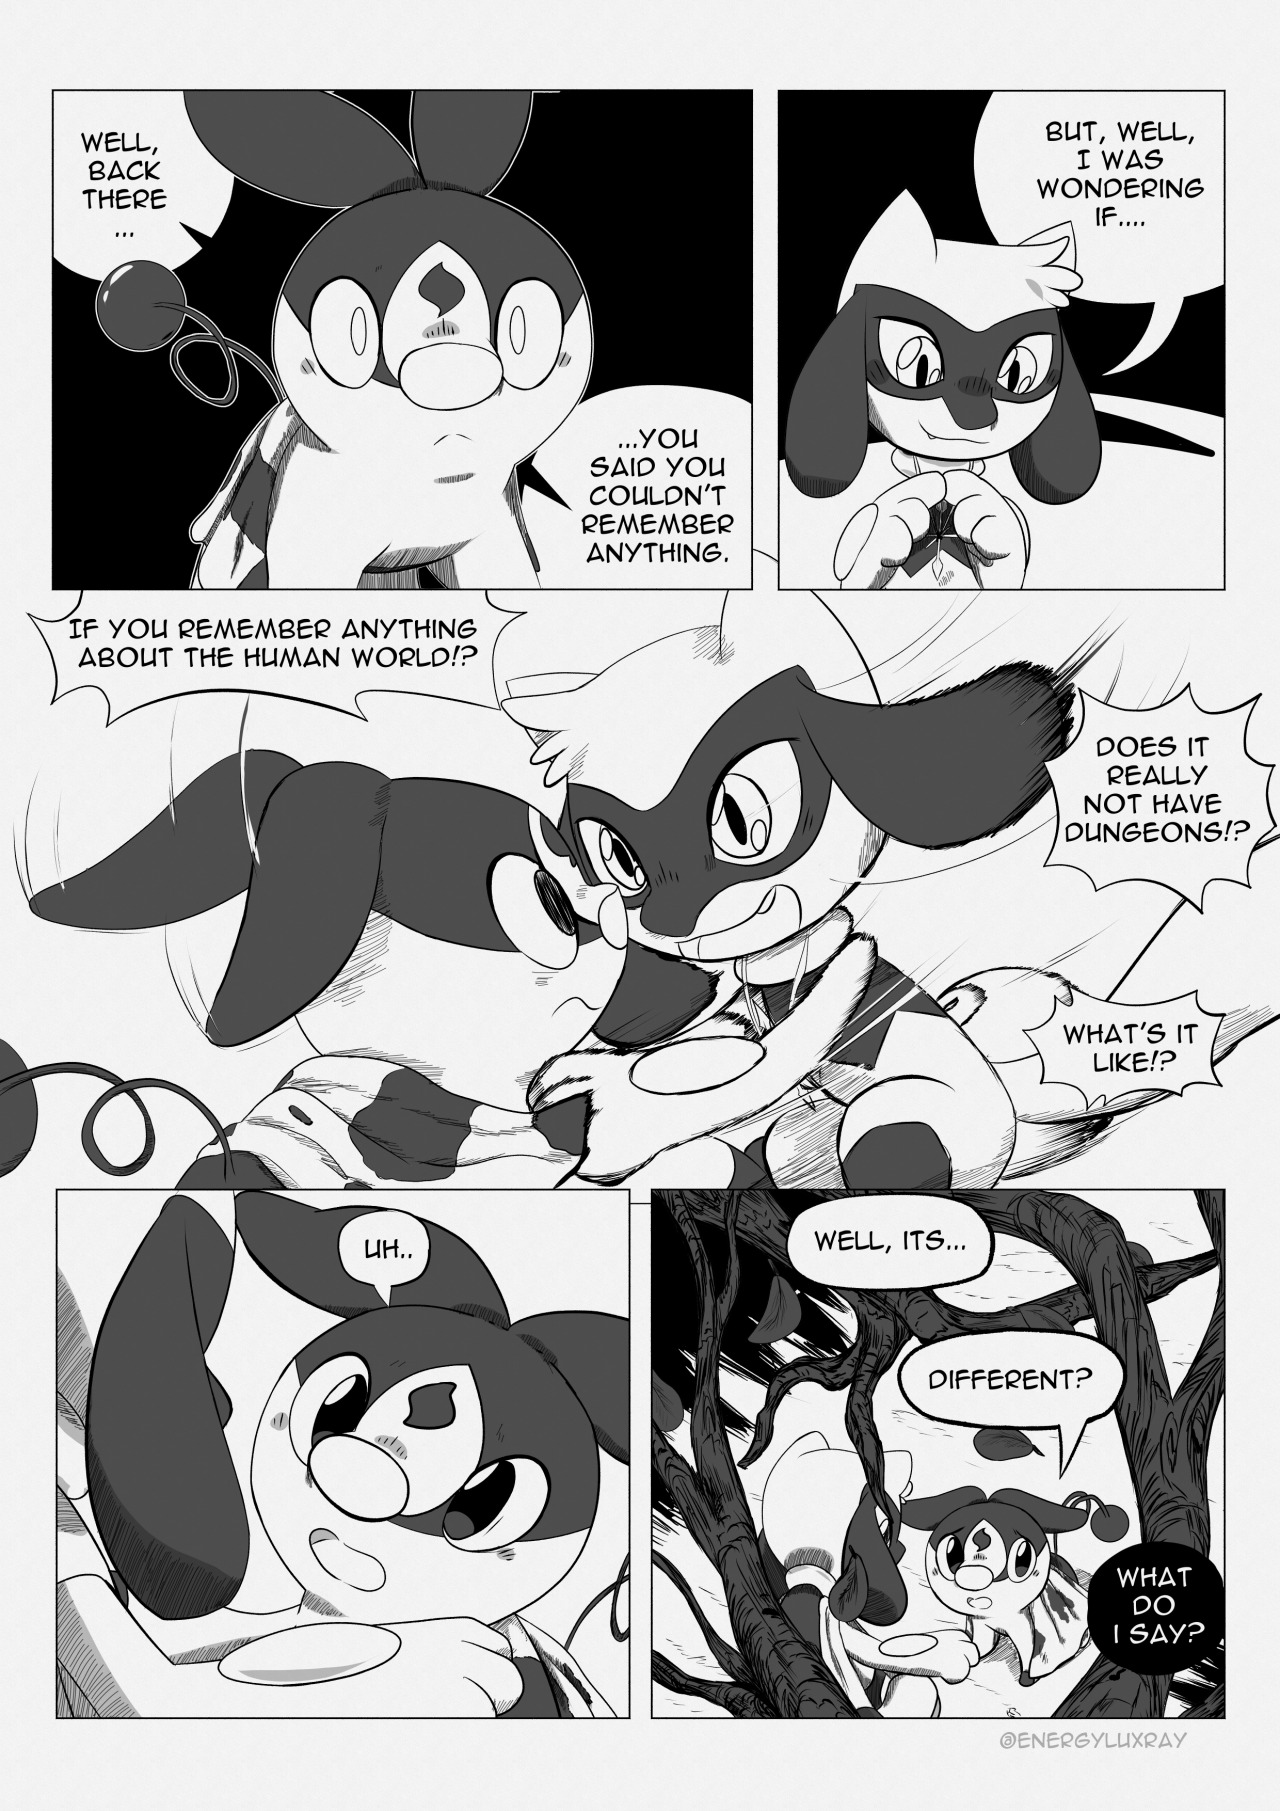 Woah Riolu, invading personal space much?  Previous PageNext PageFirst Page of Chapter OneFirst Page of ComicDeviantArt ComicFury #pokemon #pokemon mystery dungeon  #the human connection #riolu#te[pig#chapterone #gettin hands there Riolu #tepig